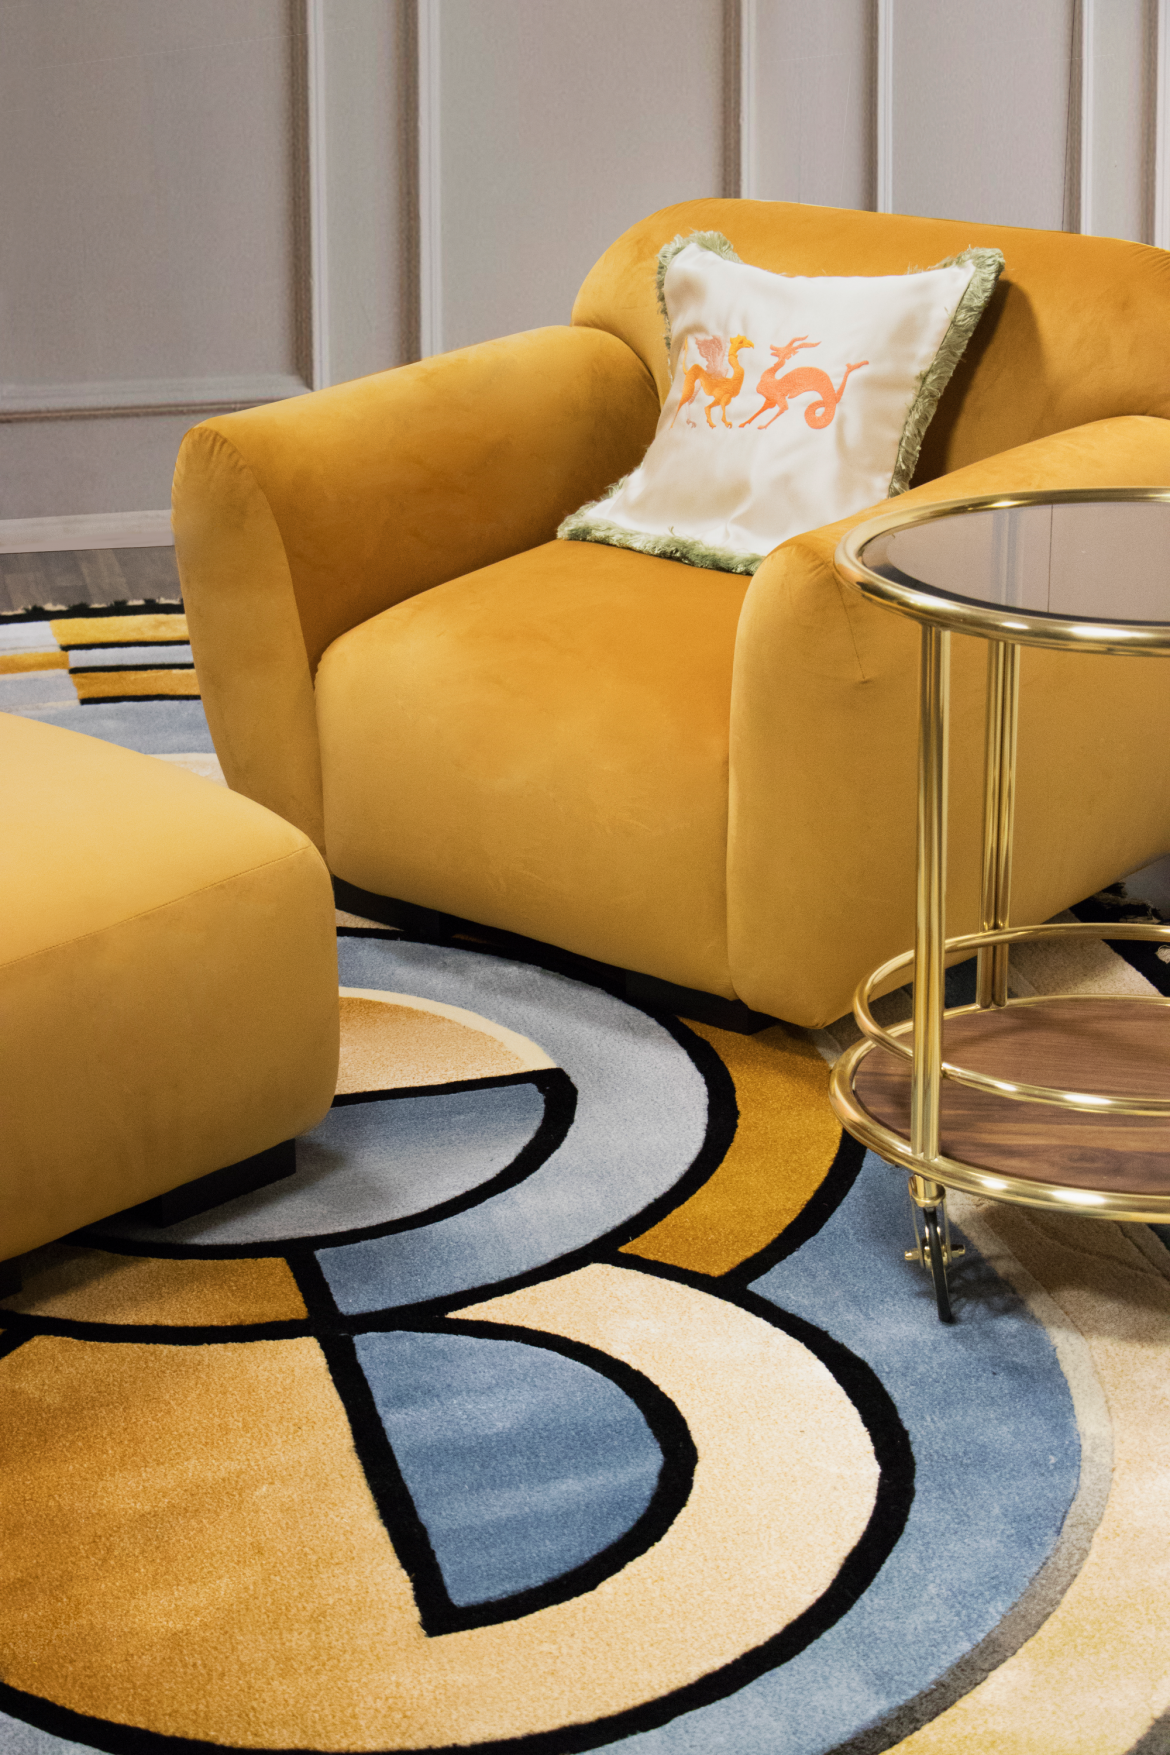 2020 Spring Interior Design Trends: Colors, Textures and Patterns 4